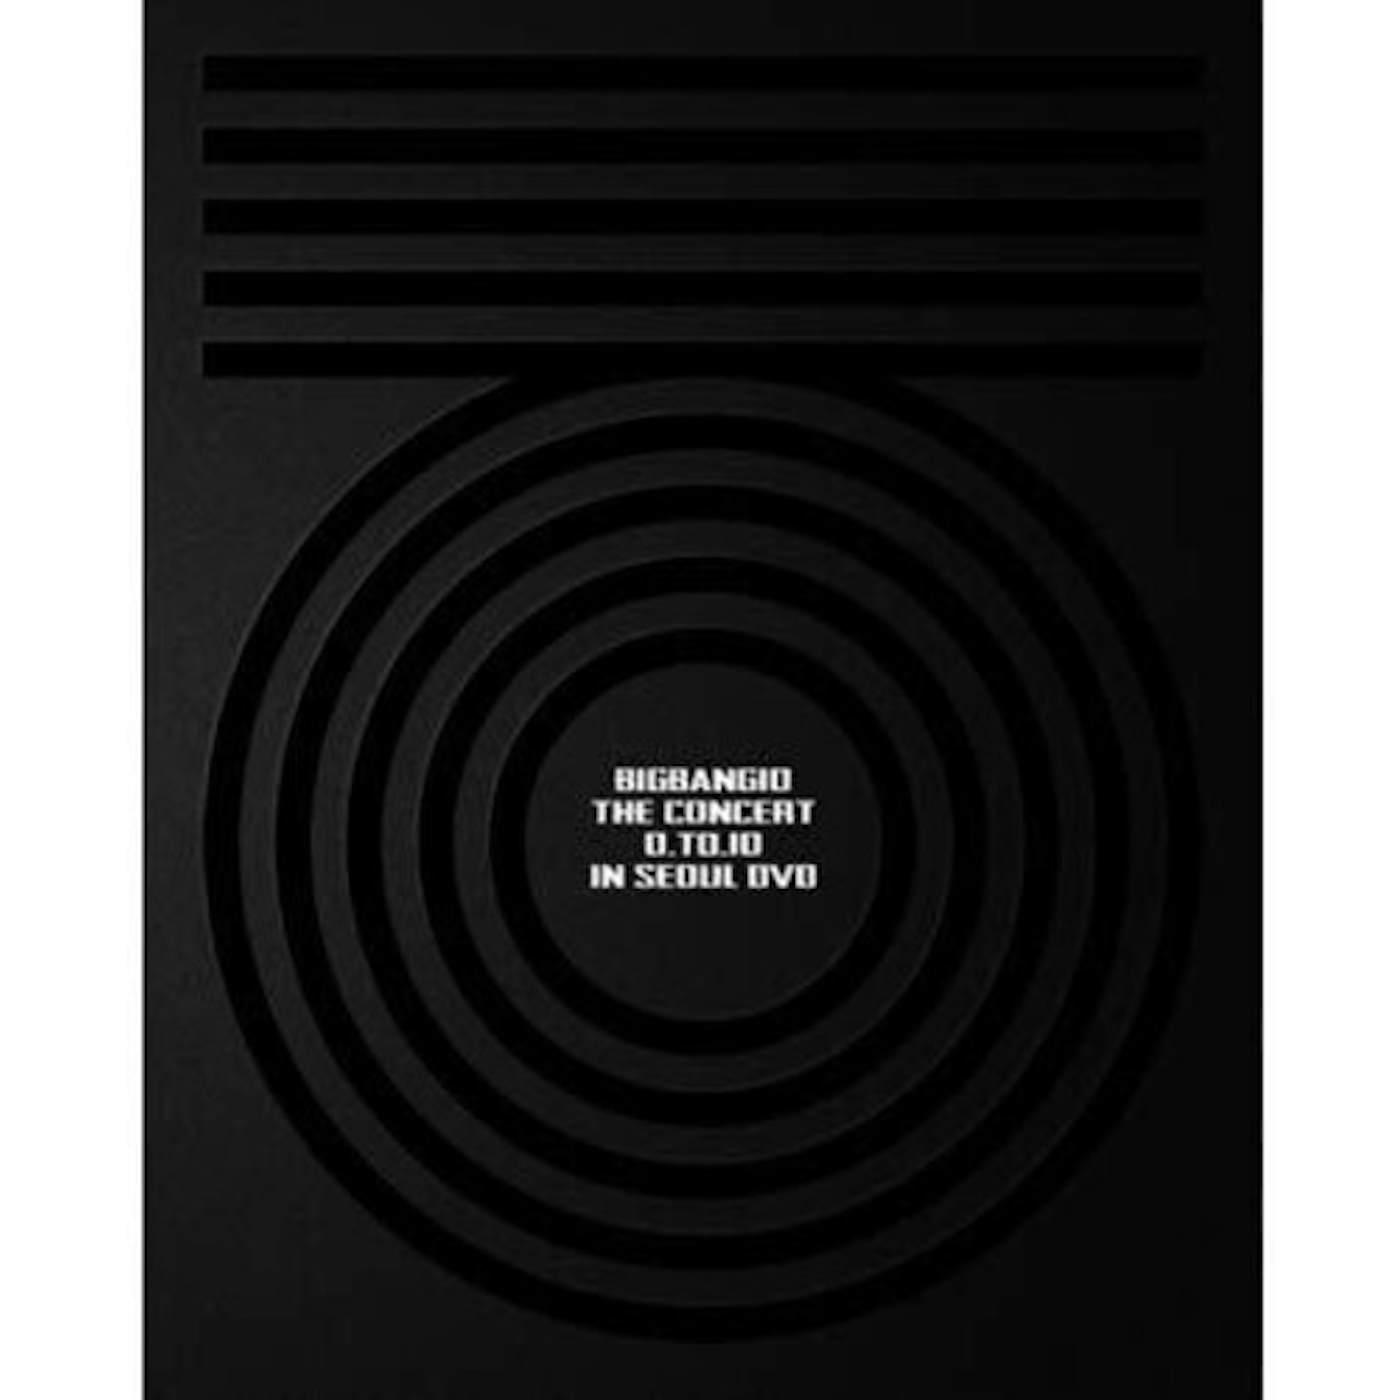 BIGBANG10 THE CONCERT 0.TO.10 IN SEOUL: DELUXE DVD